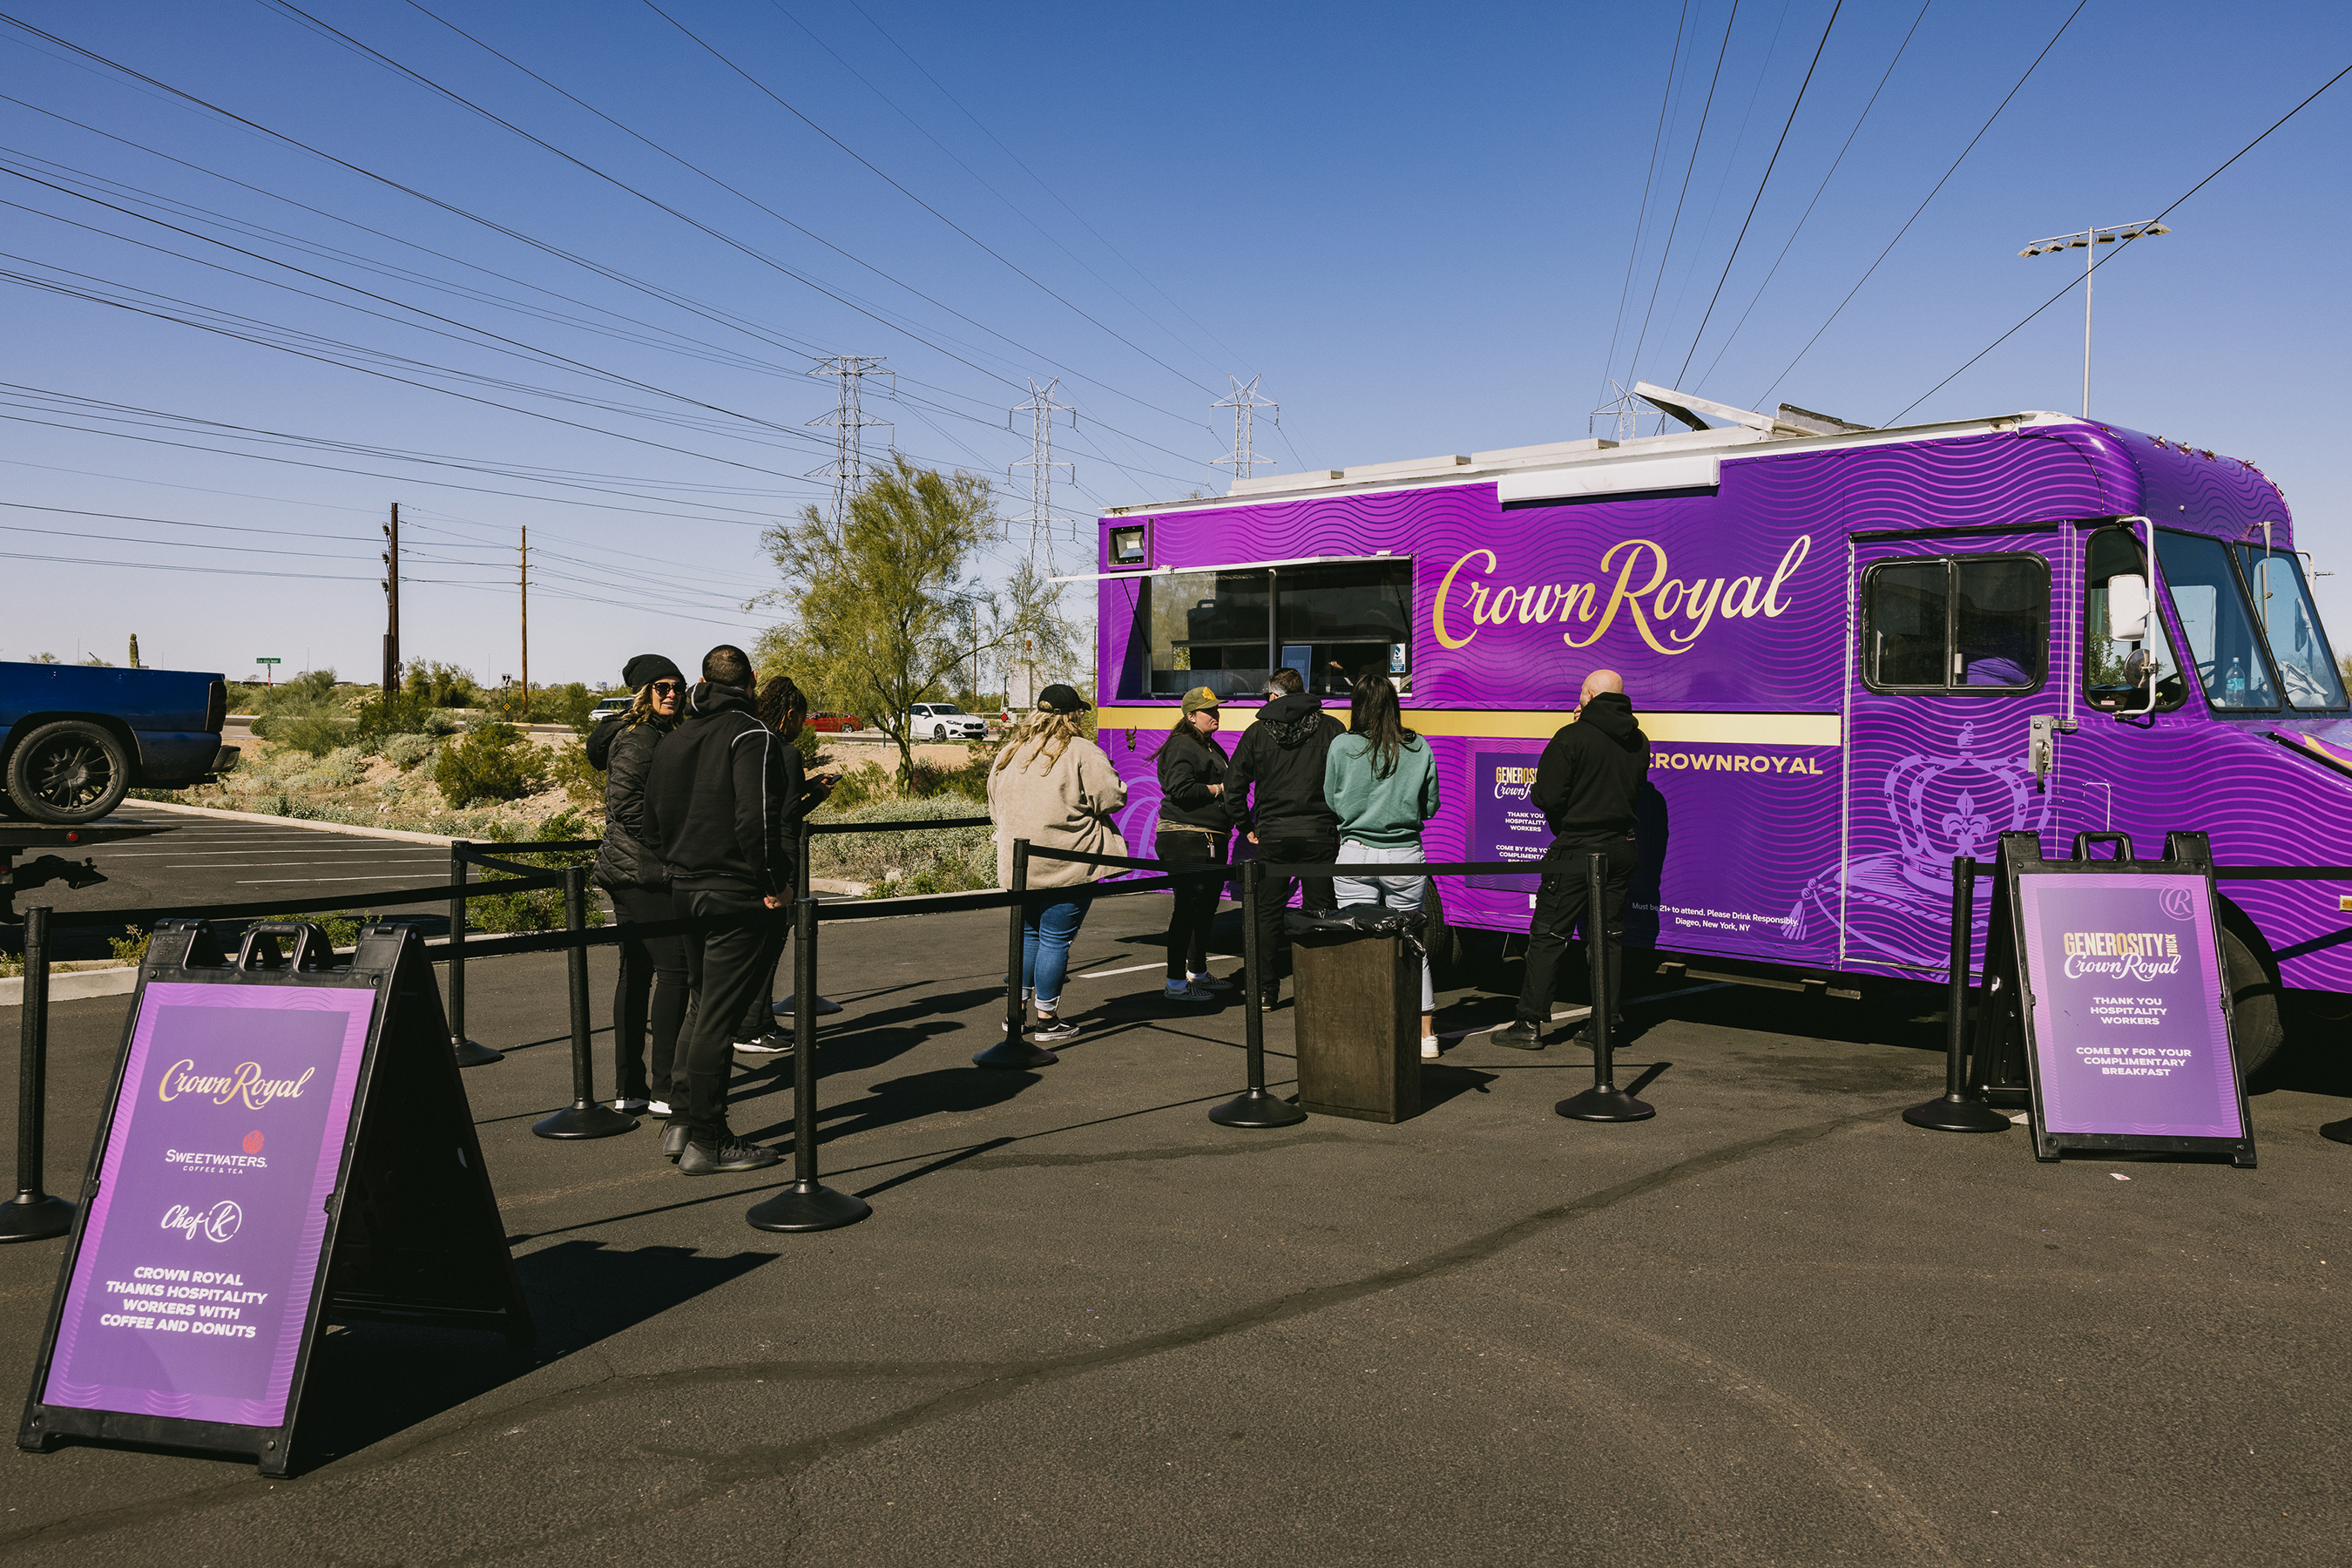 The Crown Royal Generosity Food Truck served its “Gratitude Menu,” to hospitality members, including  freshly brewed coffee and an exclusive Crown Royal-inspired purple donut.